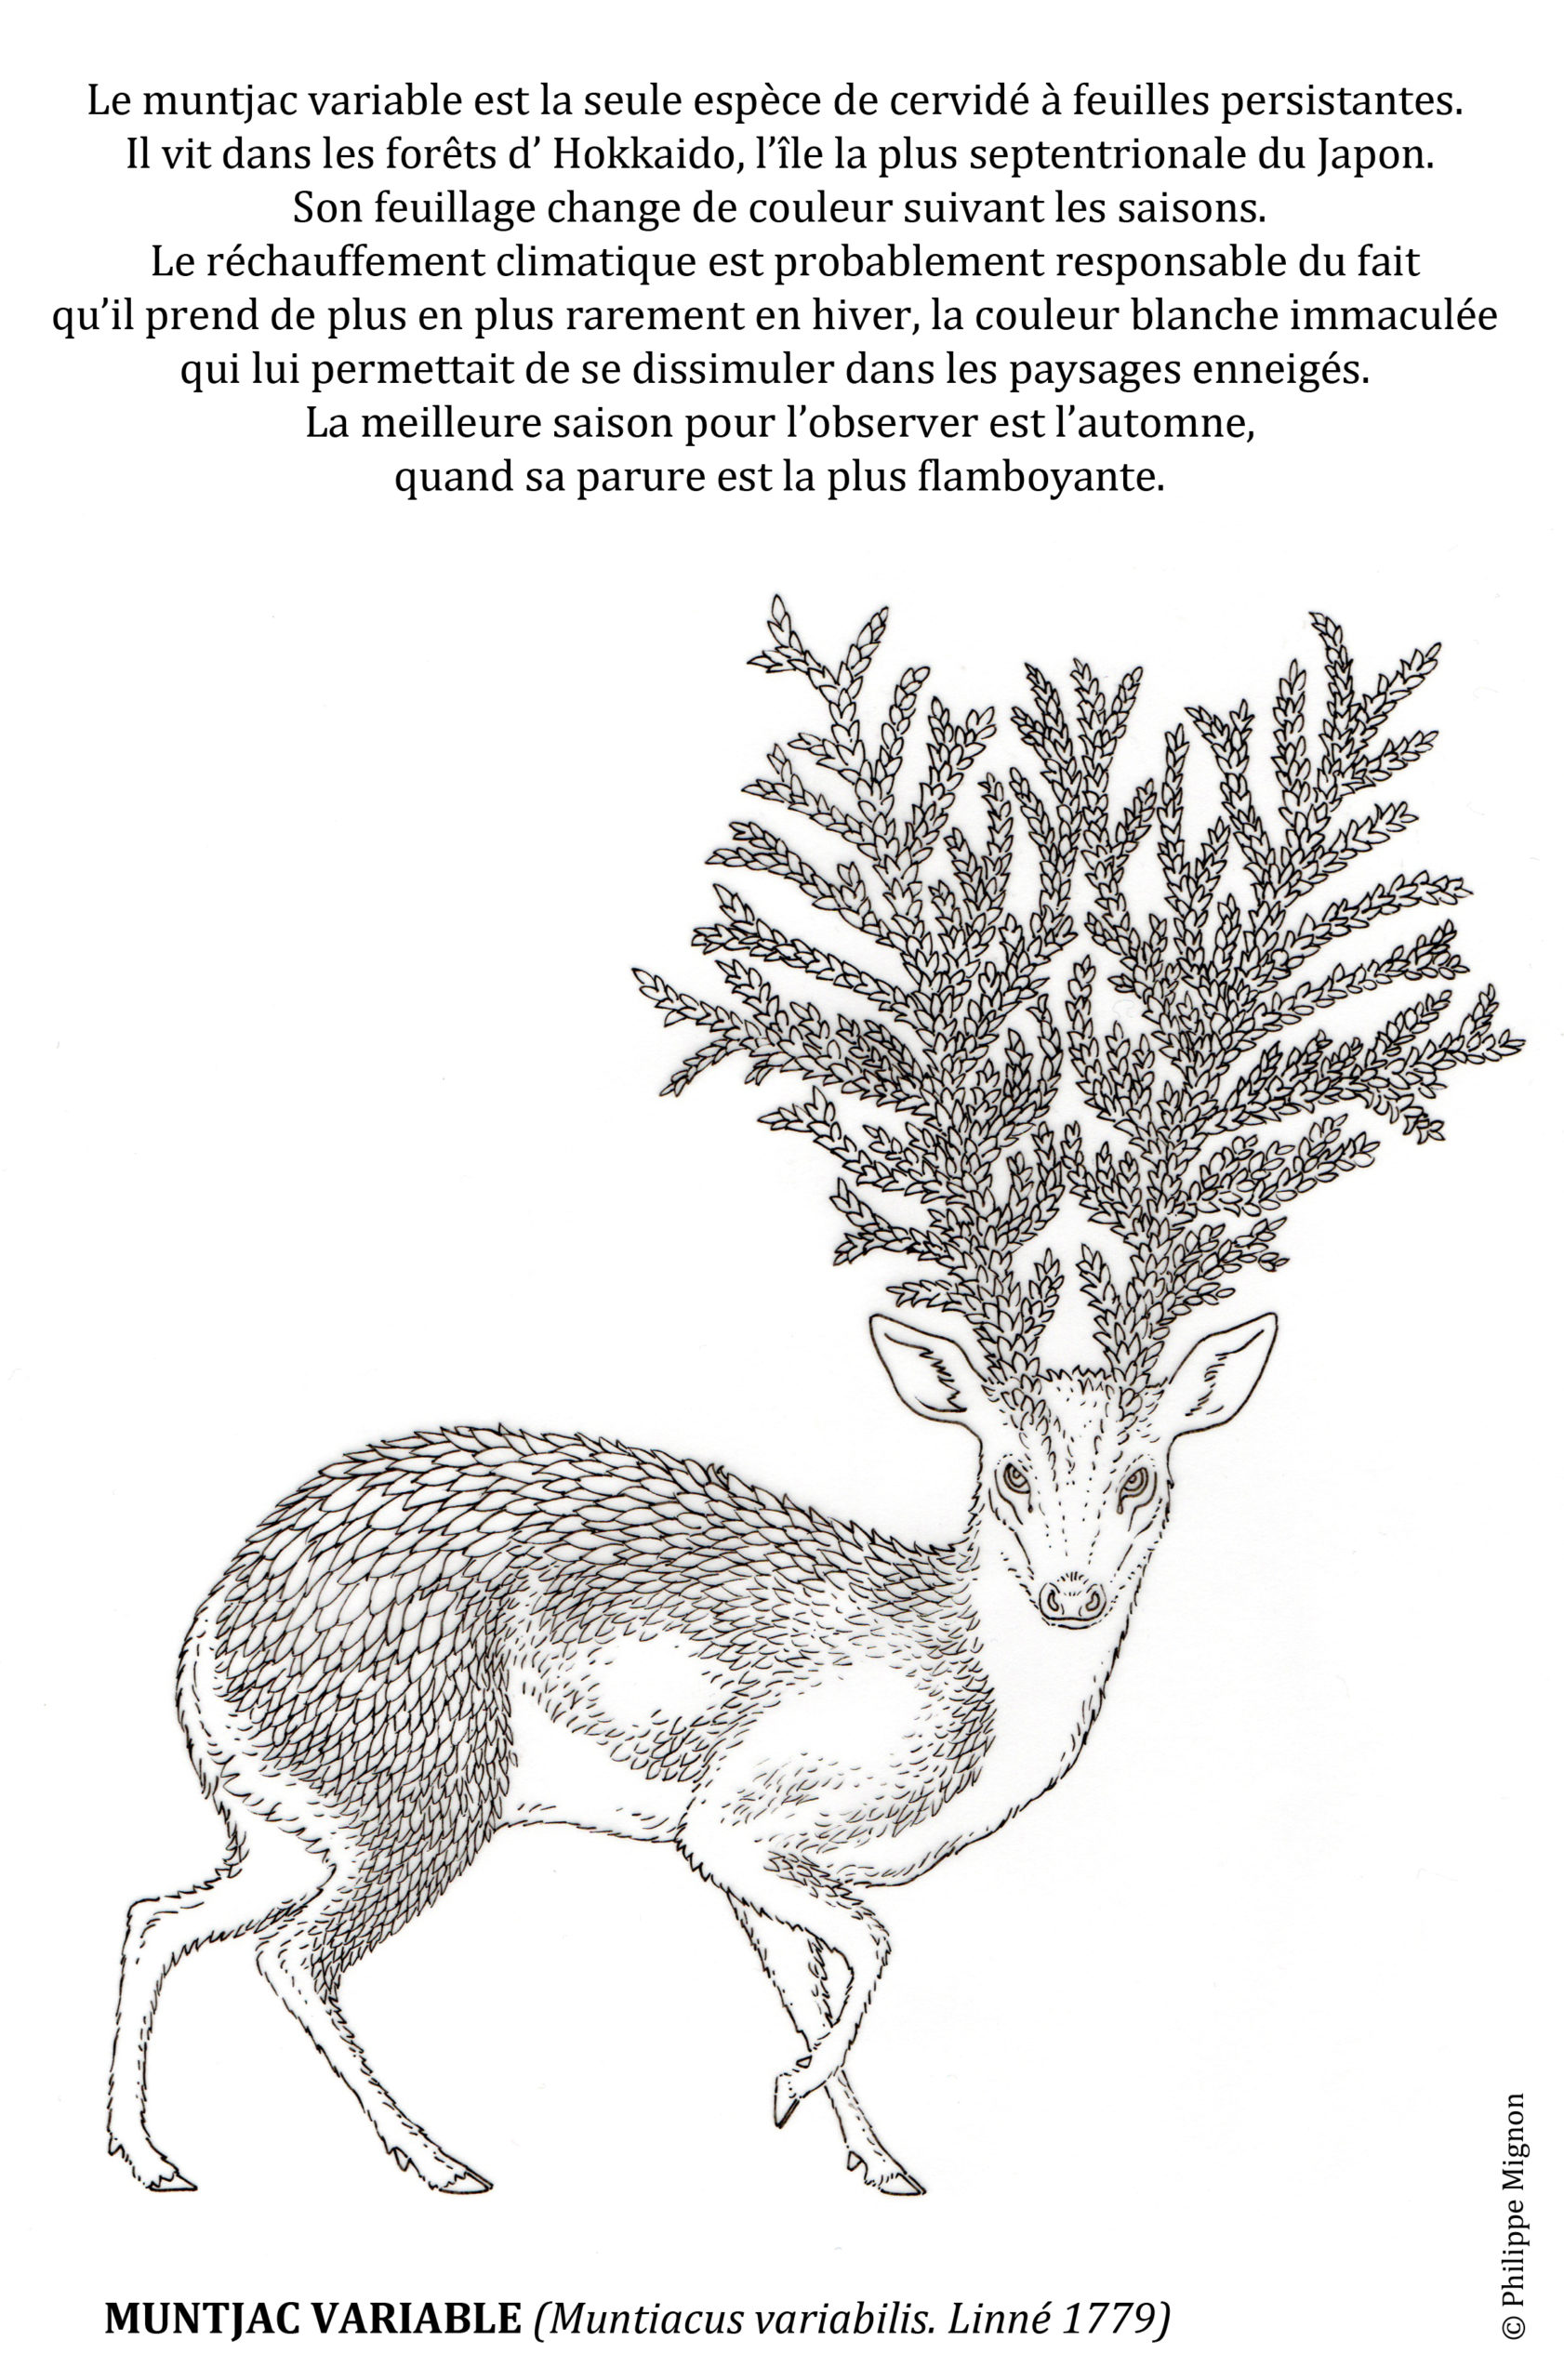 Le muntjac variable